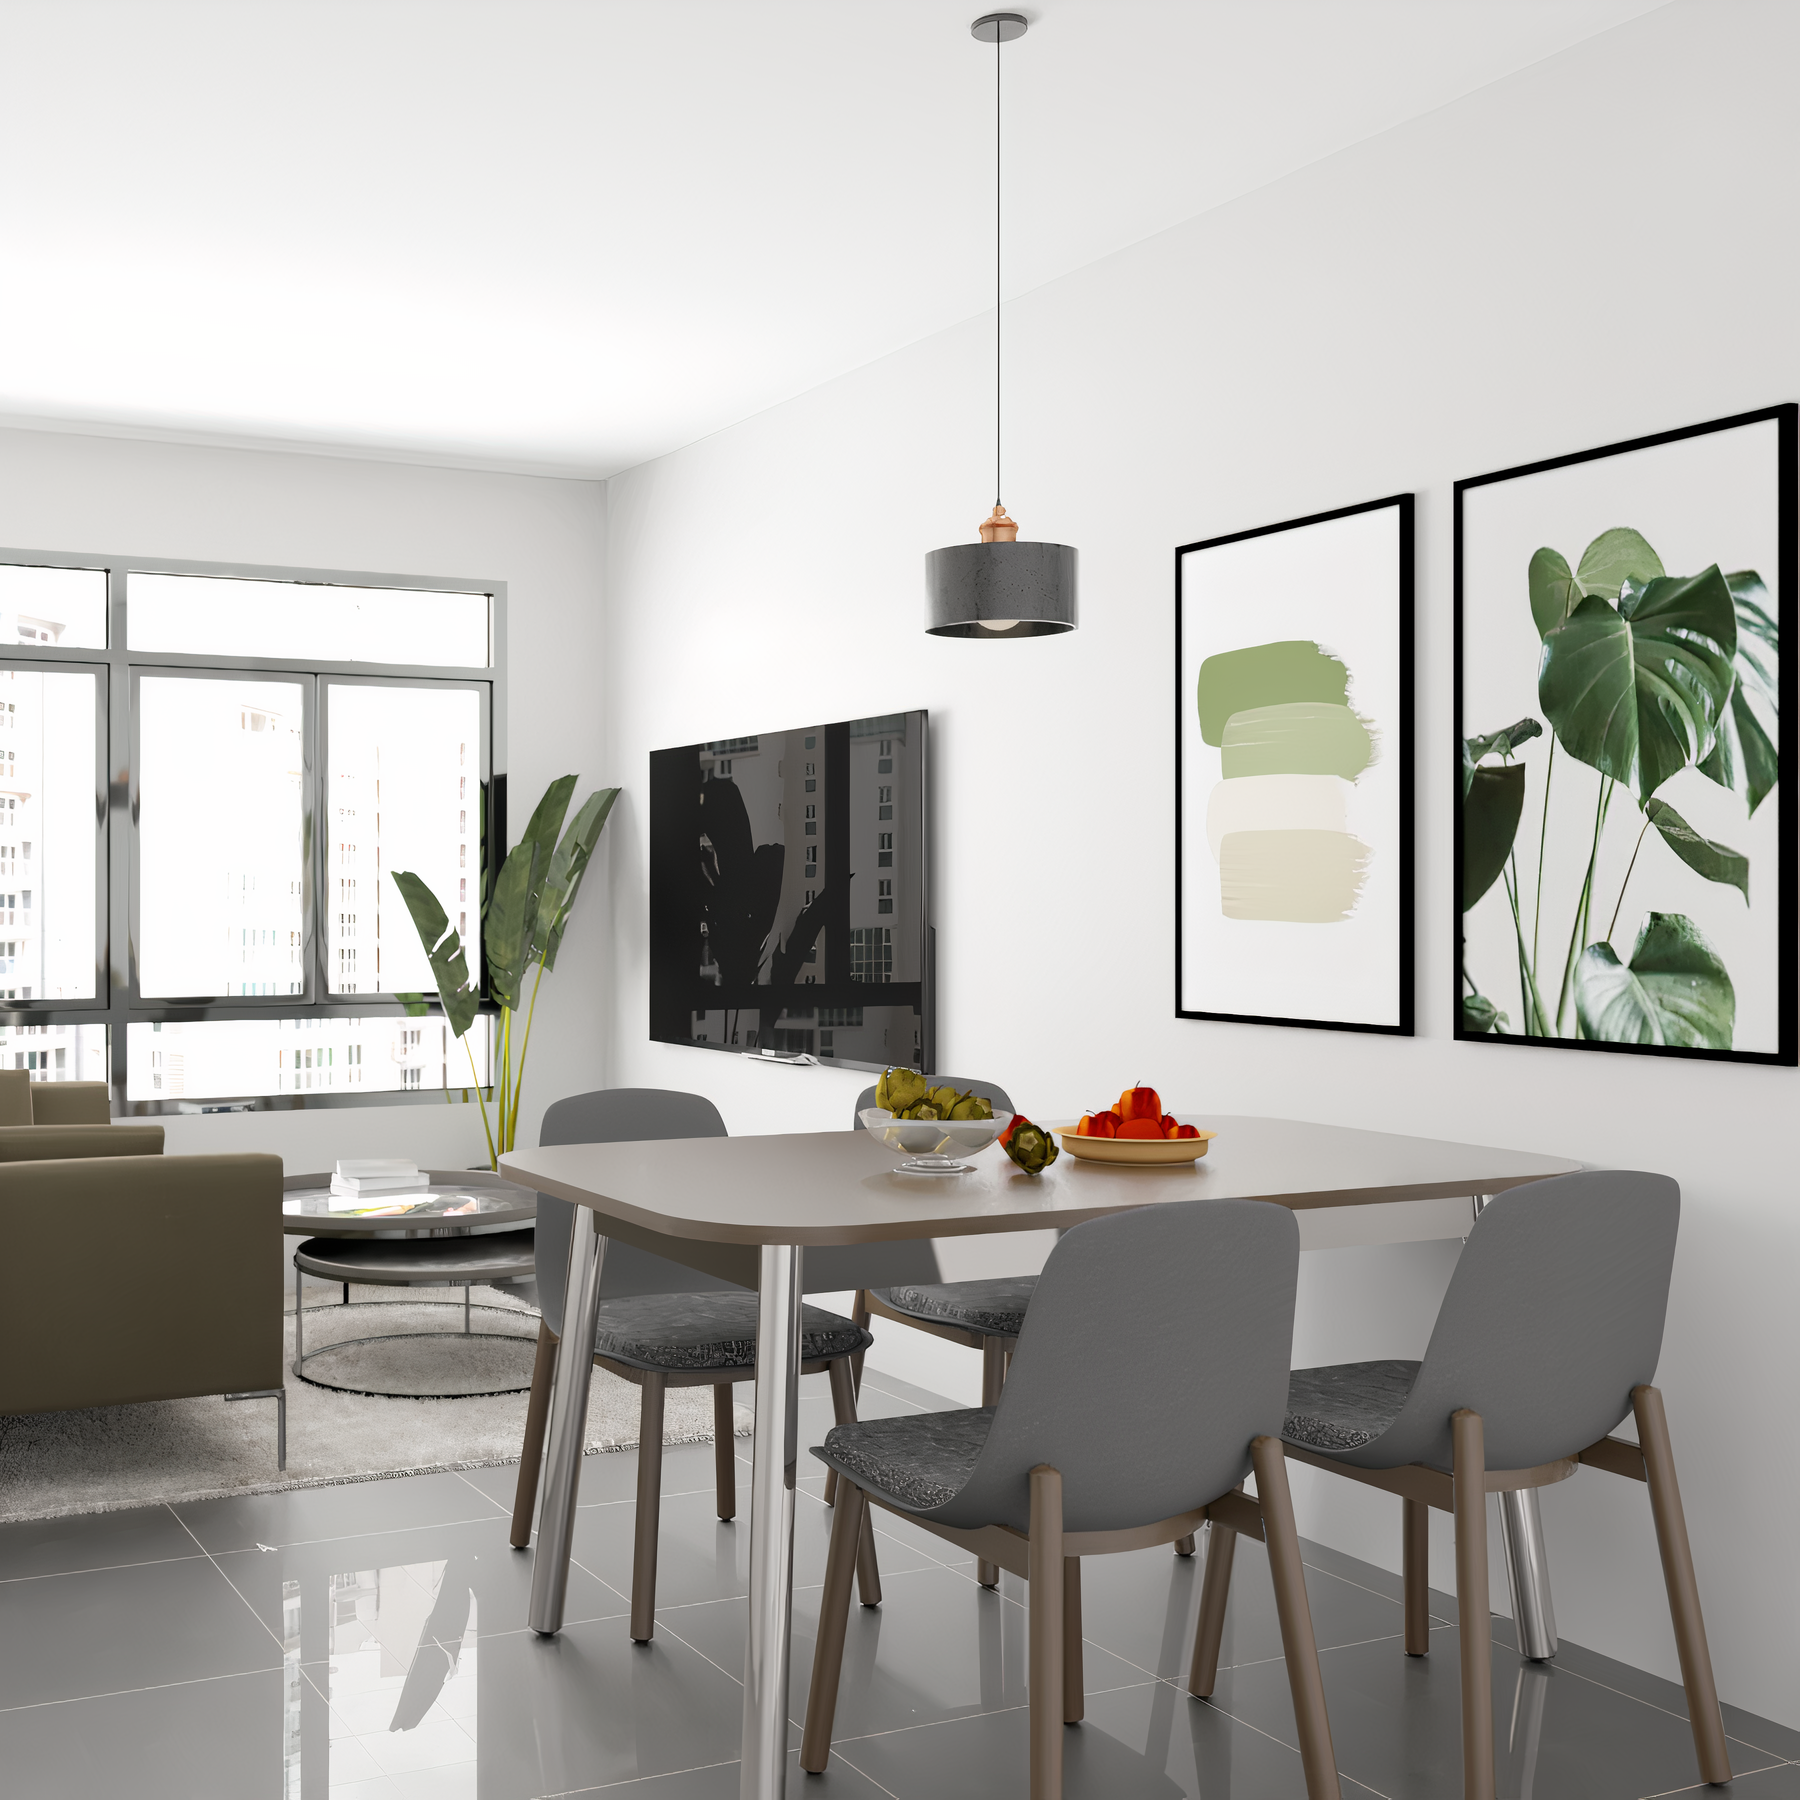 Minimal 4-Seater Dining Room Design With Wall Frames